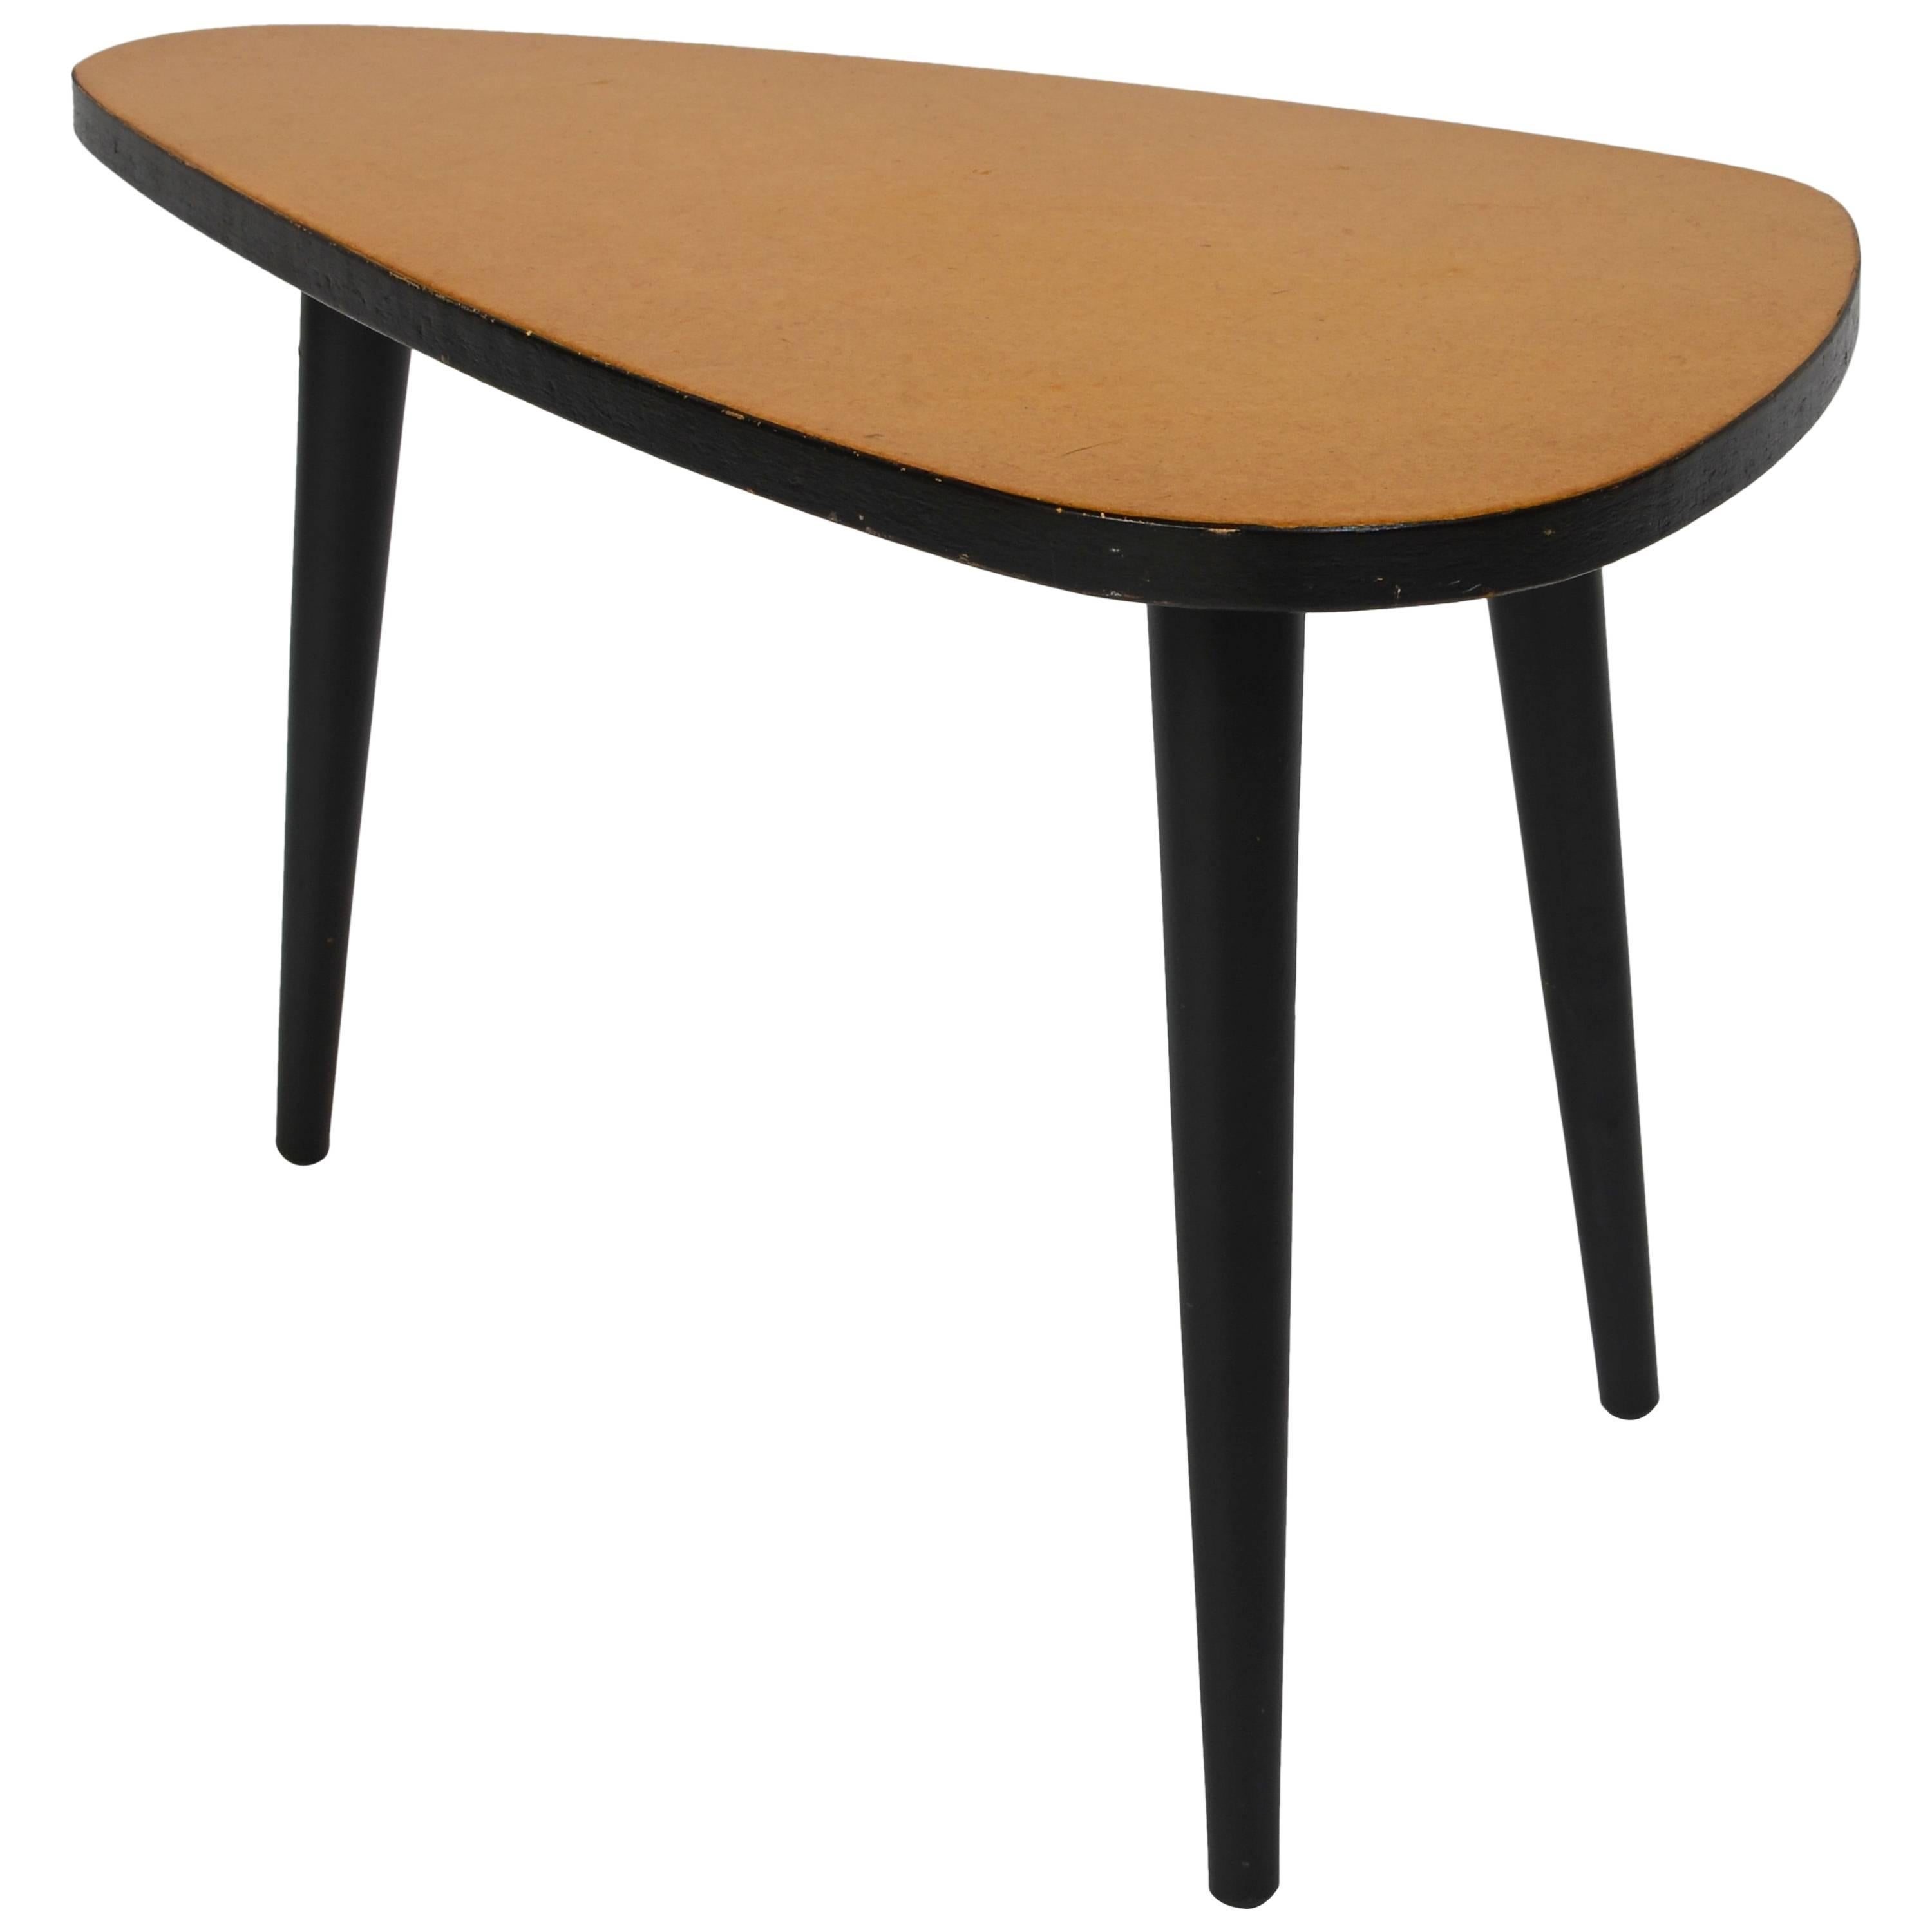 Lacquered Cork Side Table by Maruni, Japan, 1955 For Sale